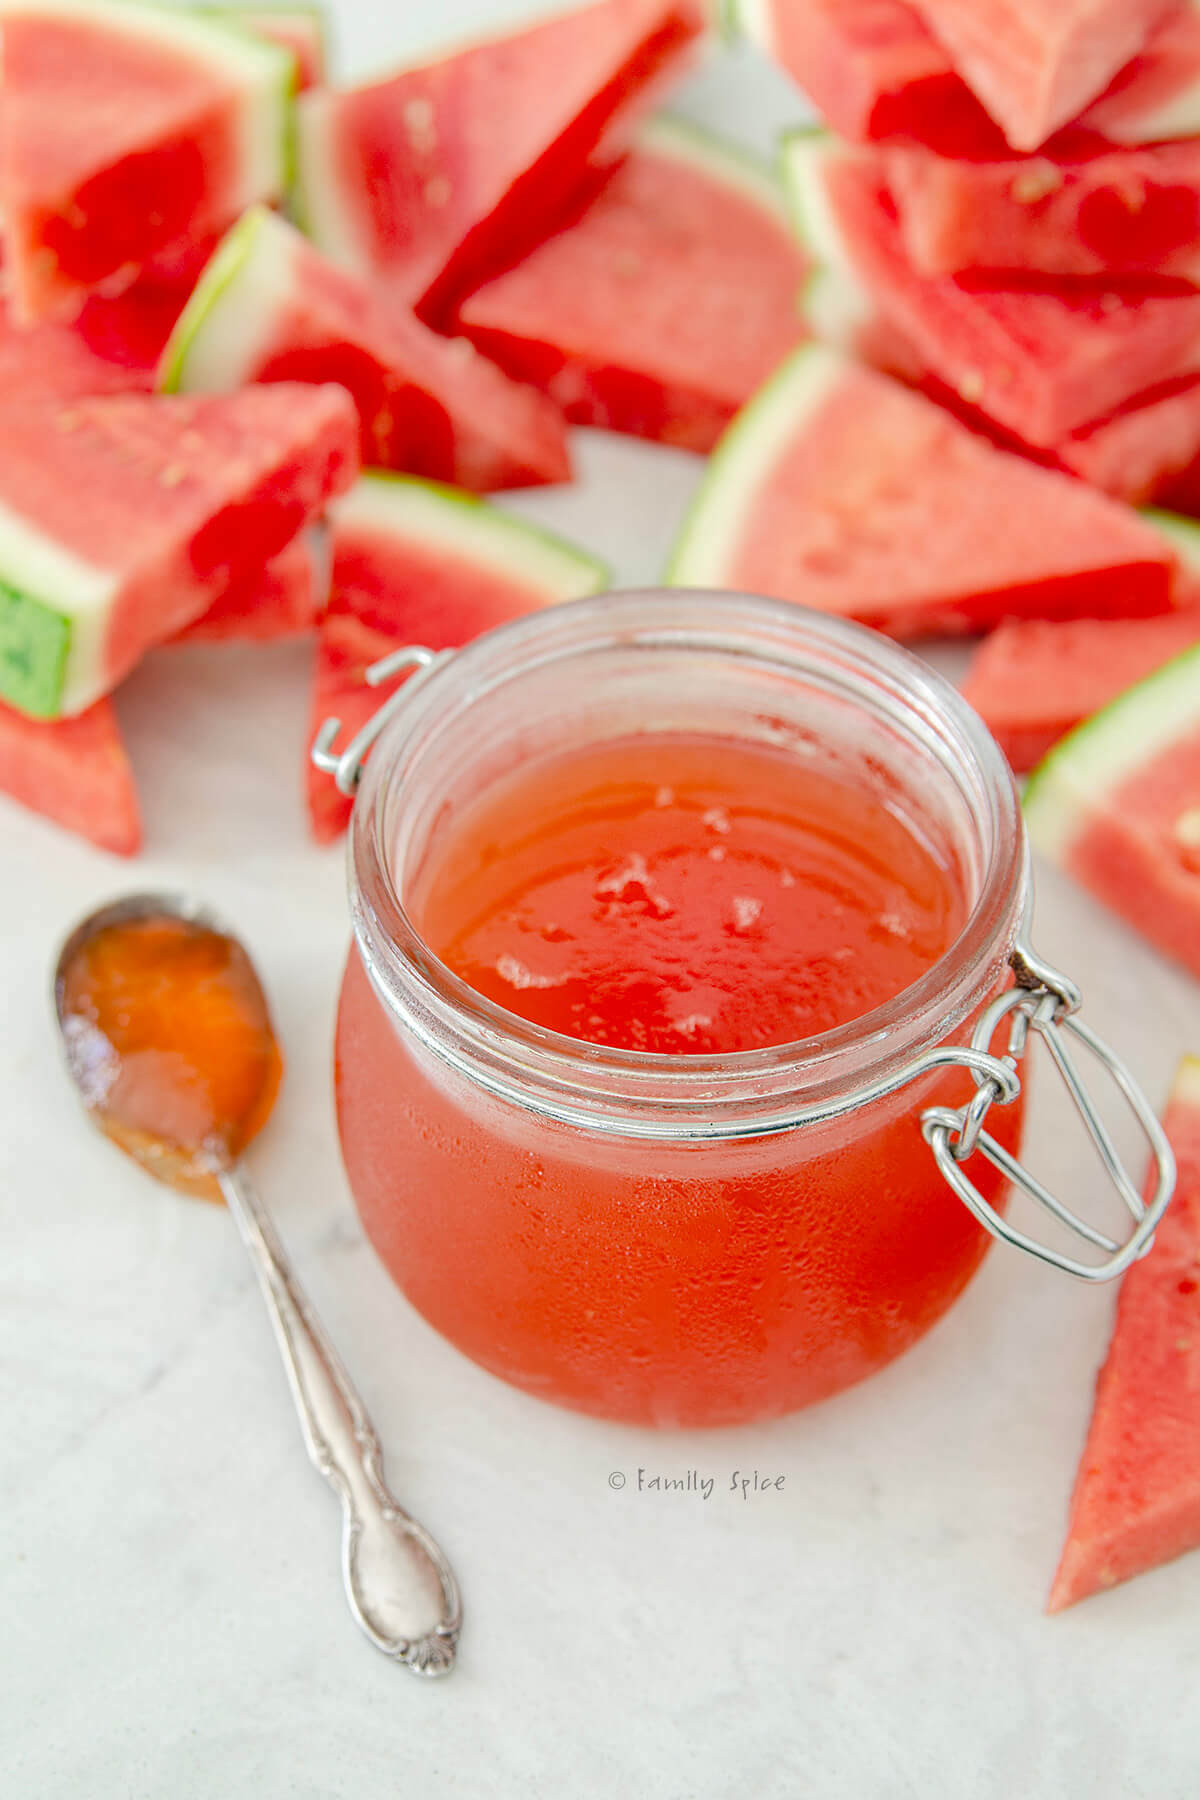 Closeup of a jar of watermelon jelly and a spoon next to it and cut up wedges of watermelon behind it